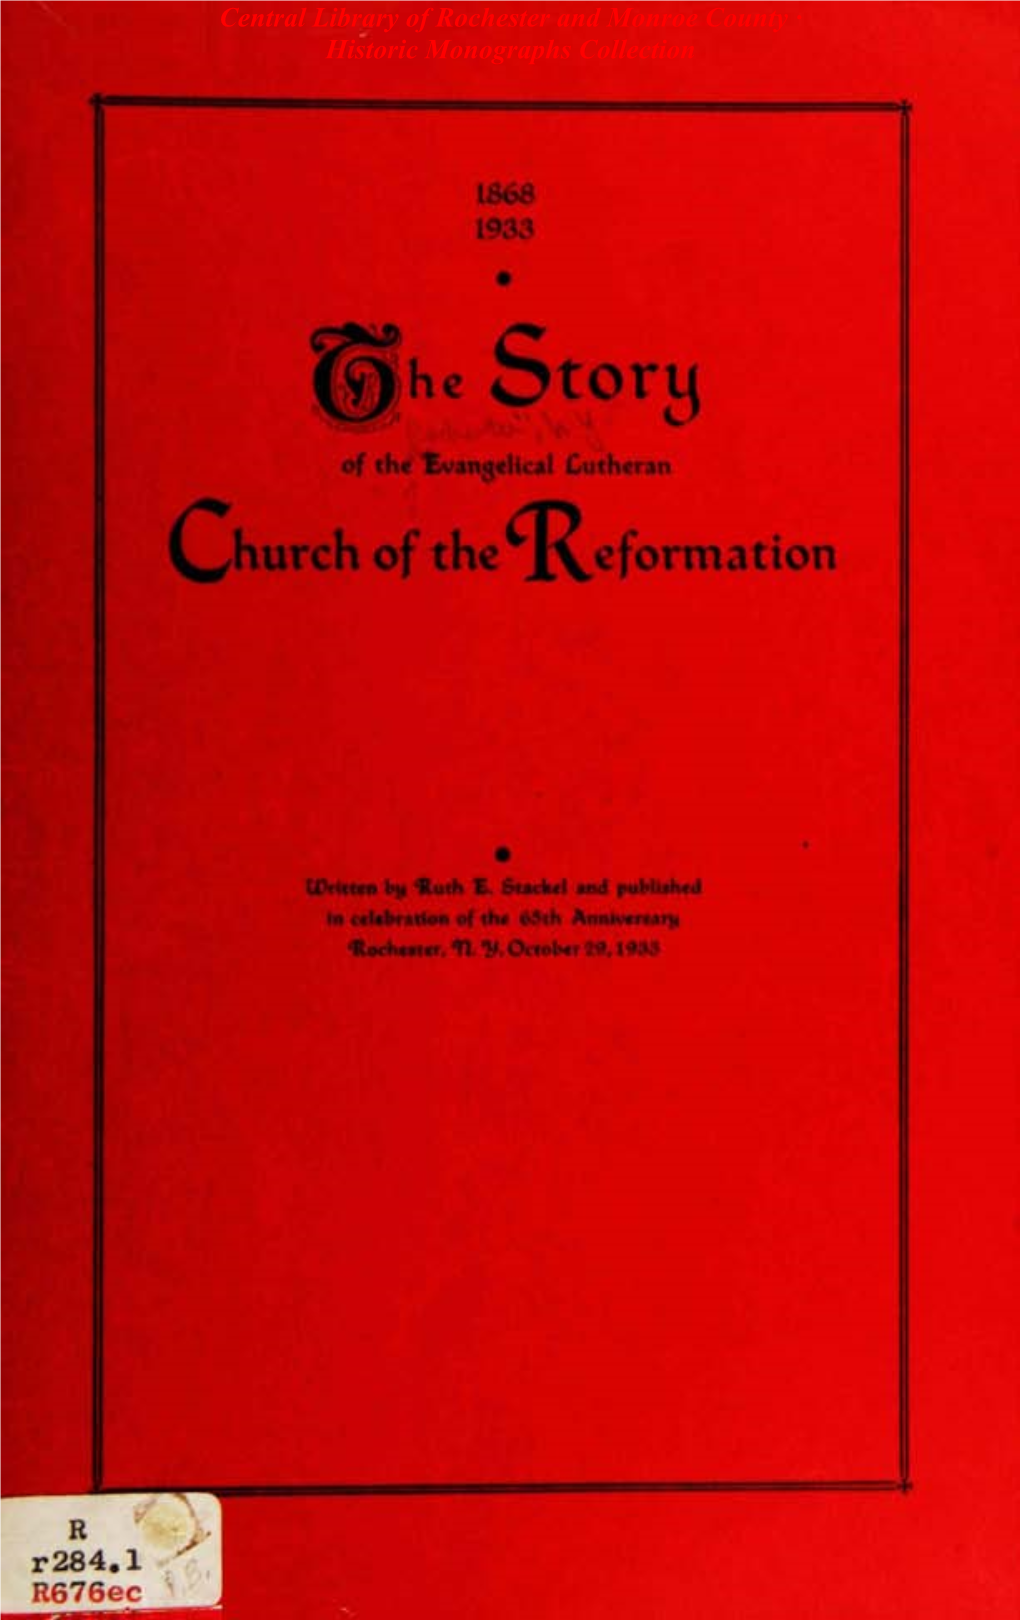 1868-1933, the Story of the Evangelical Lutheran Church of the Reformation